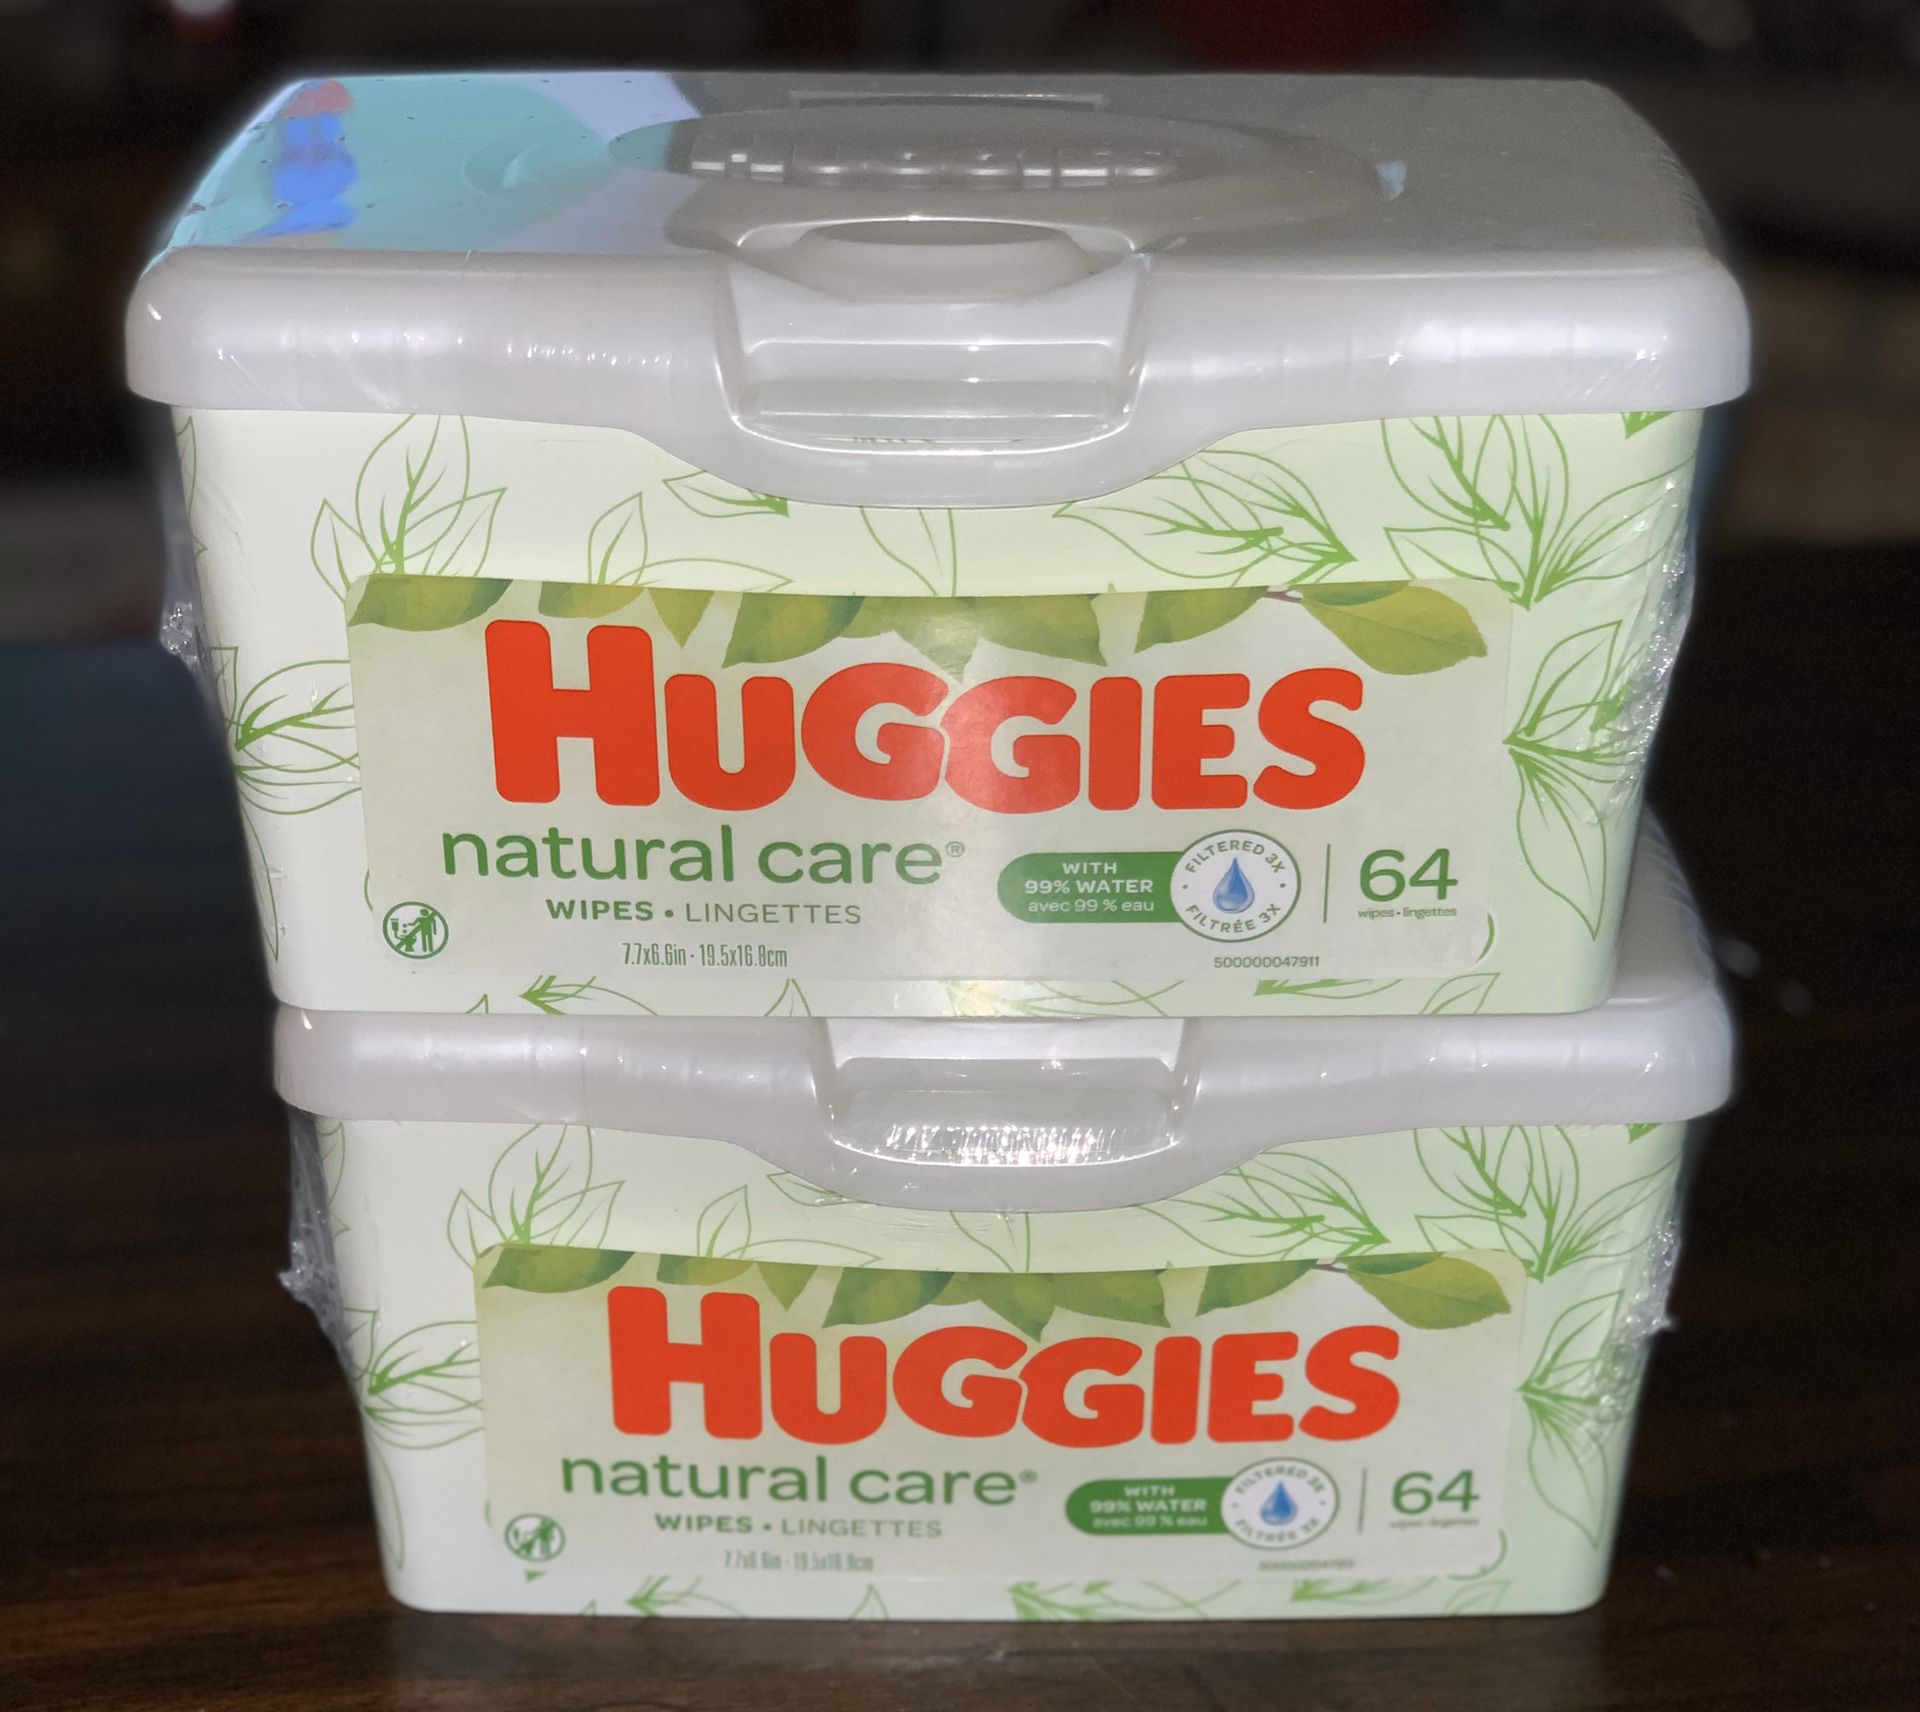 Huggies Wipes Natural Care - 64 count